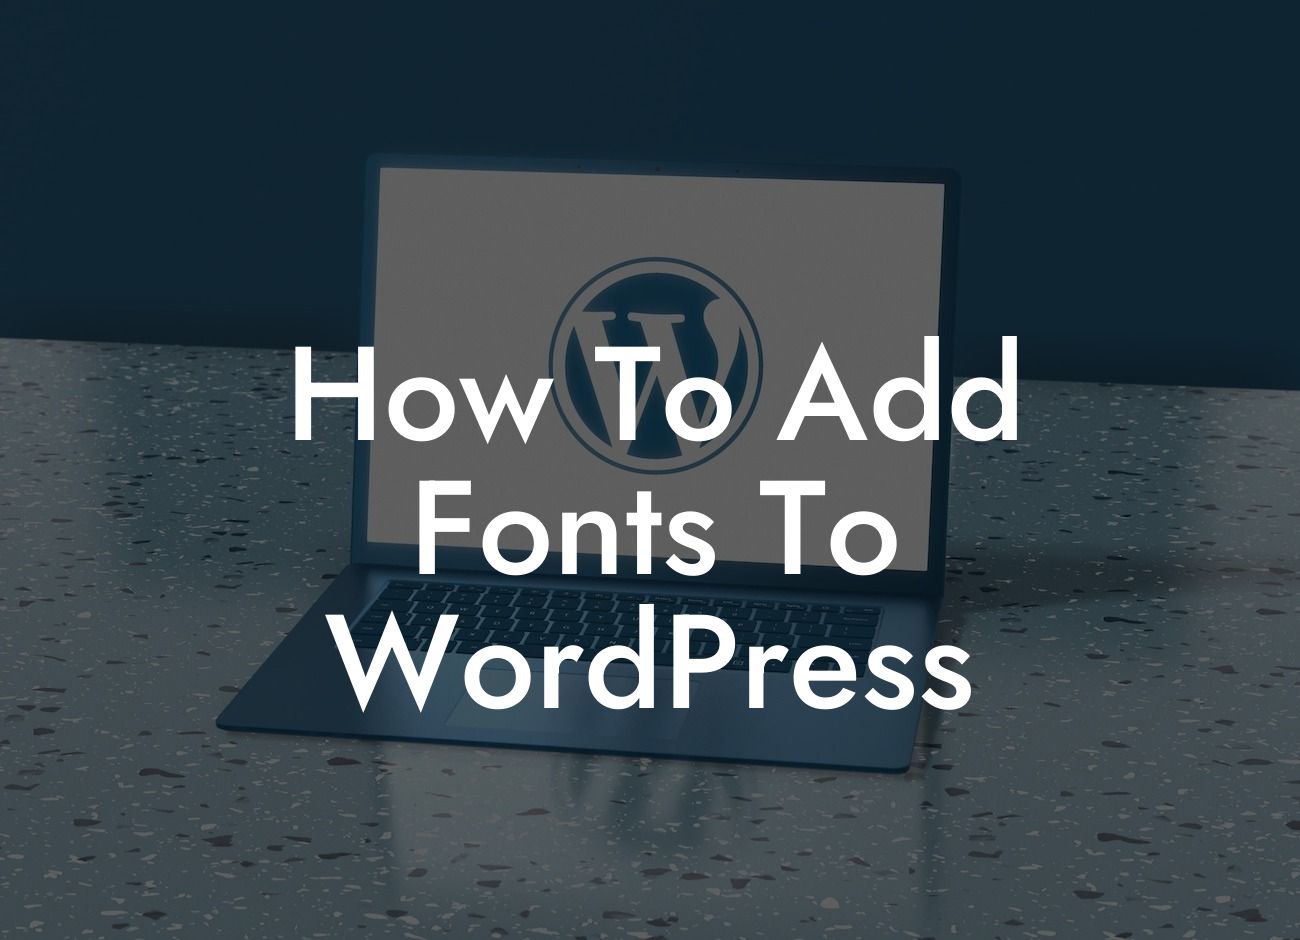 How To Add Fonts To WordPress